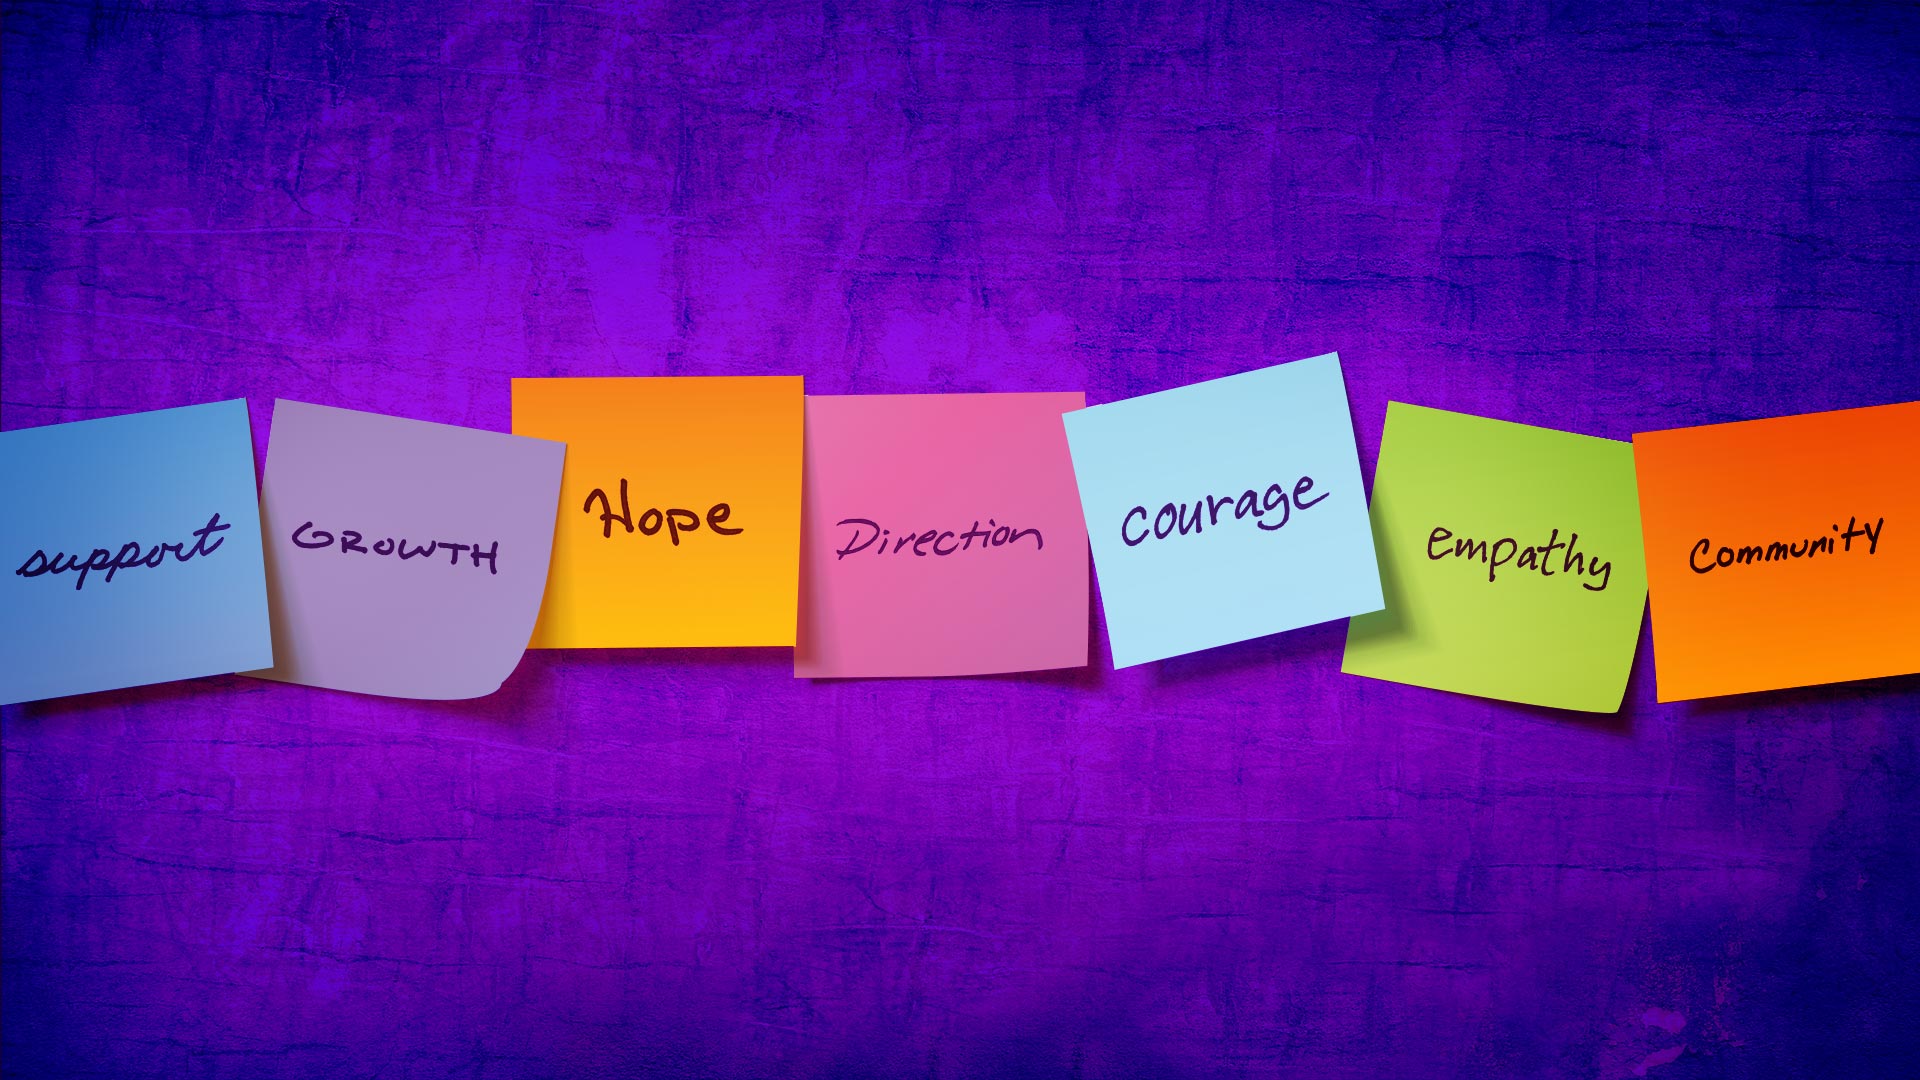 sticky notes against a purple background that say support, growth, hope, direction, courage, empathy, community